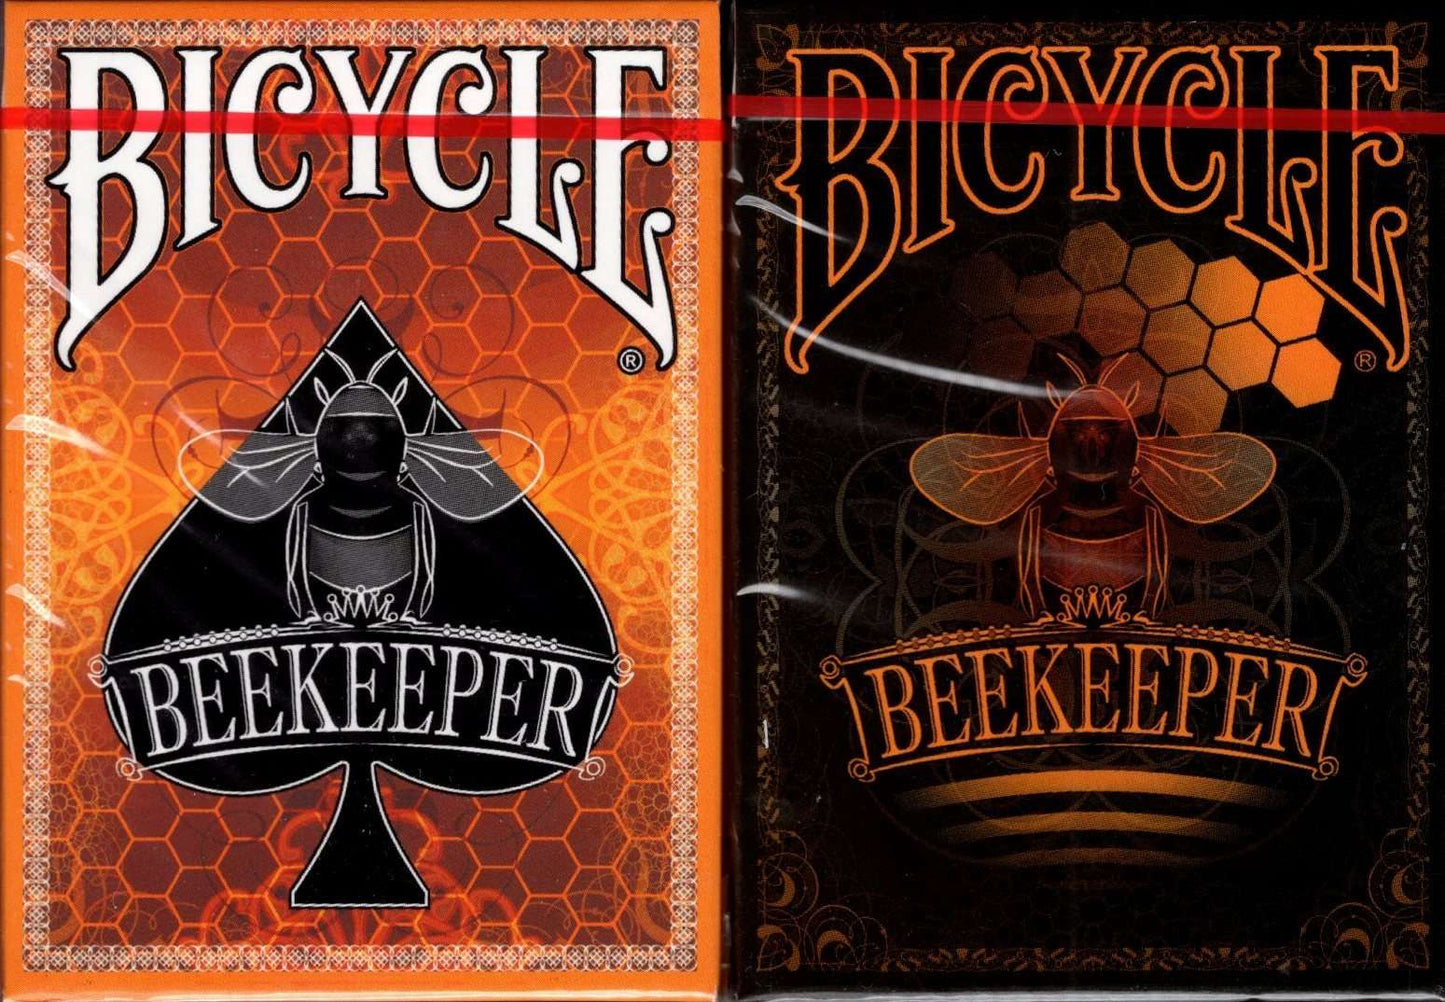 PlayingCardDecks.com-Beekeeper Gilded Bicycle Playing Cards: 2 Deck Set